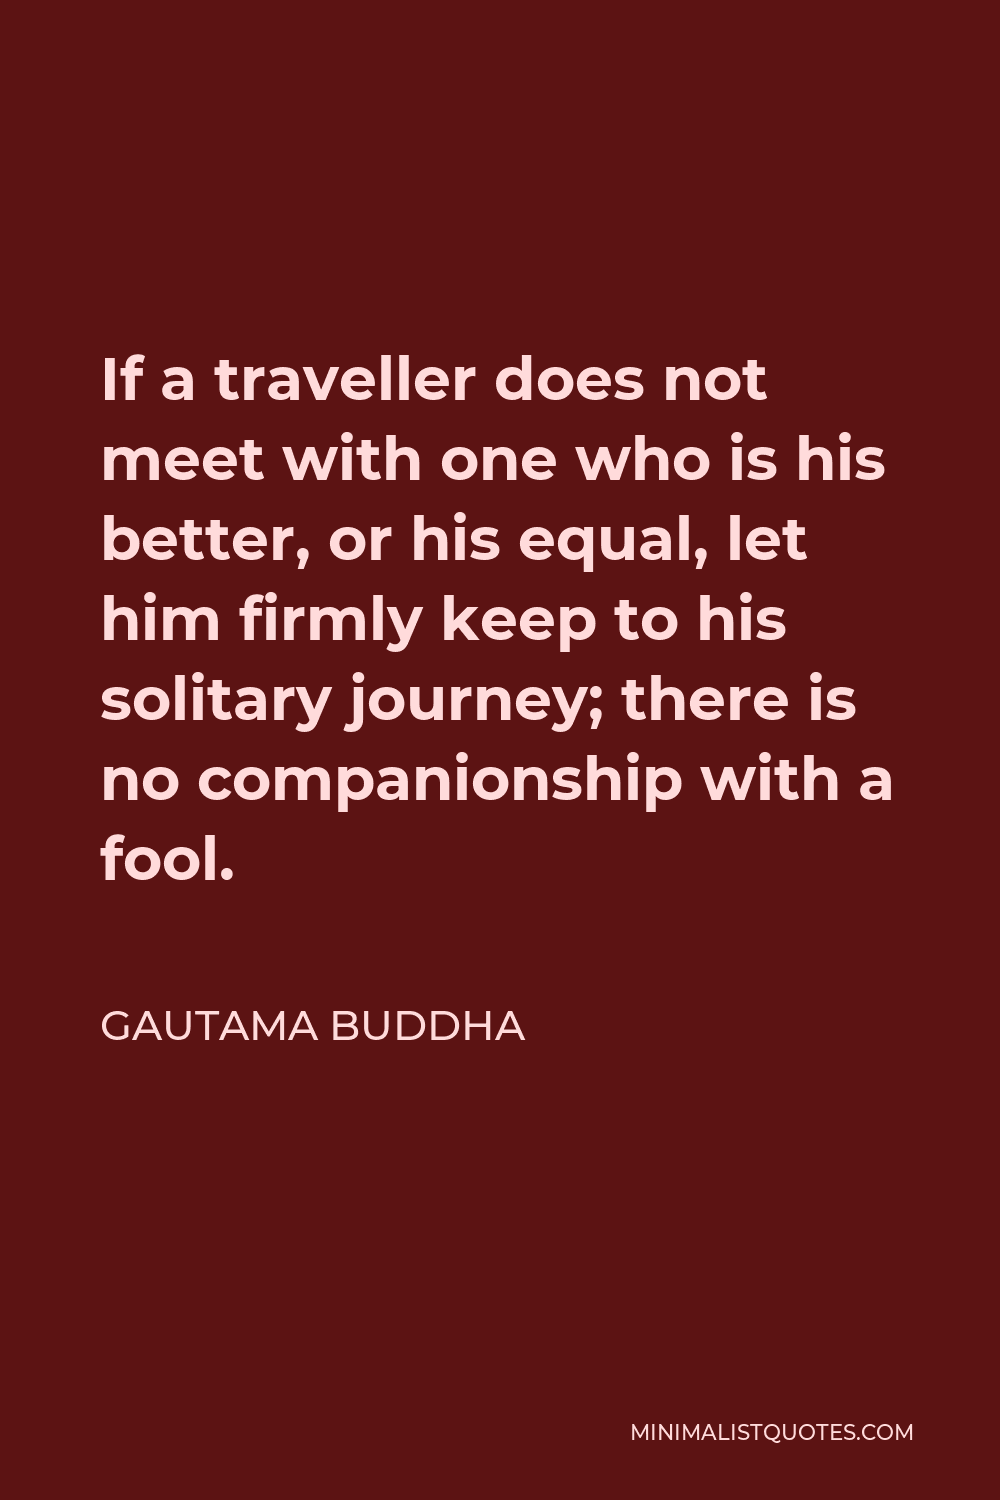 Gautama Buddha Quote - If a traveller does not meet with one who is his better, or his equal, let him firmly keep to his solitary journey; there is no companionship with a fool.